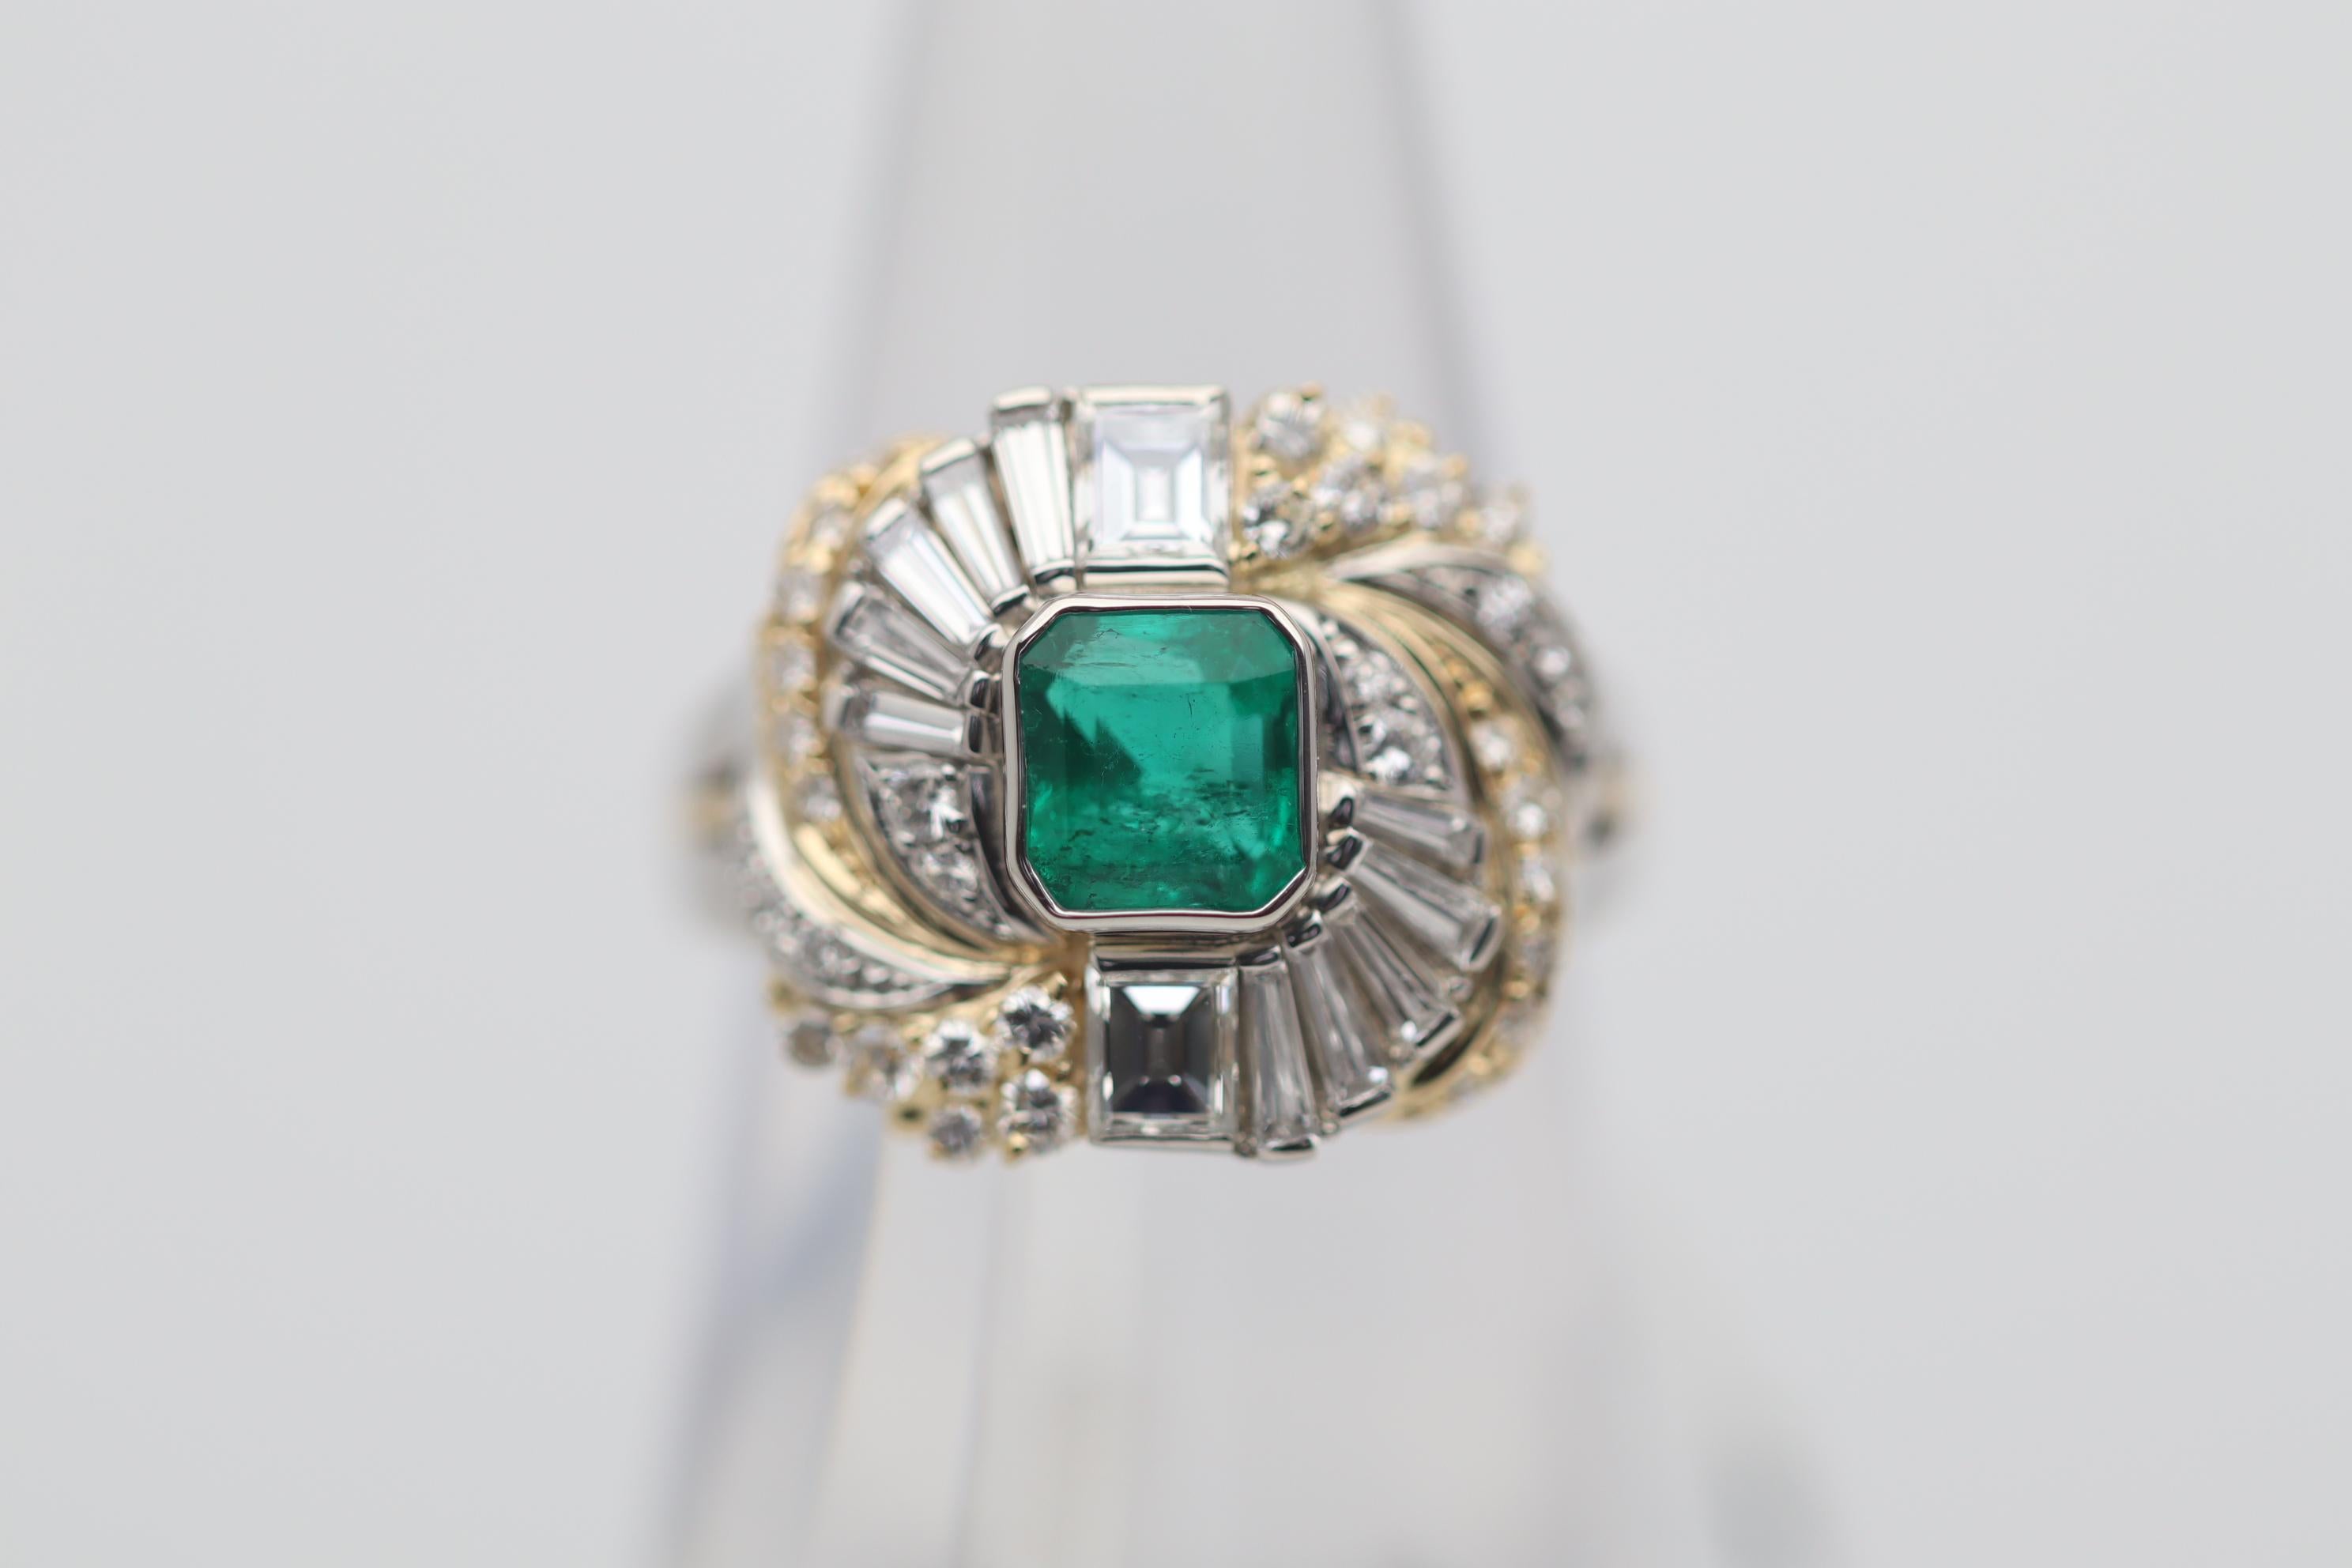 A chic and stylish ring featuring a fine gem-quality emerald in its center. The emerald weighs 0.95 carats and the ideal bright intense green color emeralds are famous for. Complementing the fine gemstone are 1.12 carats of diamonds which include